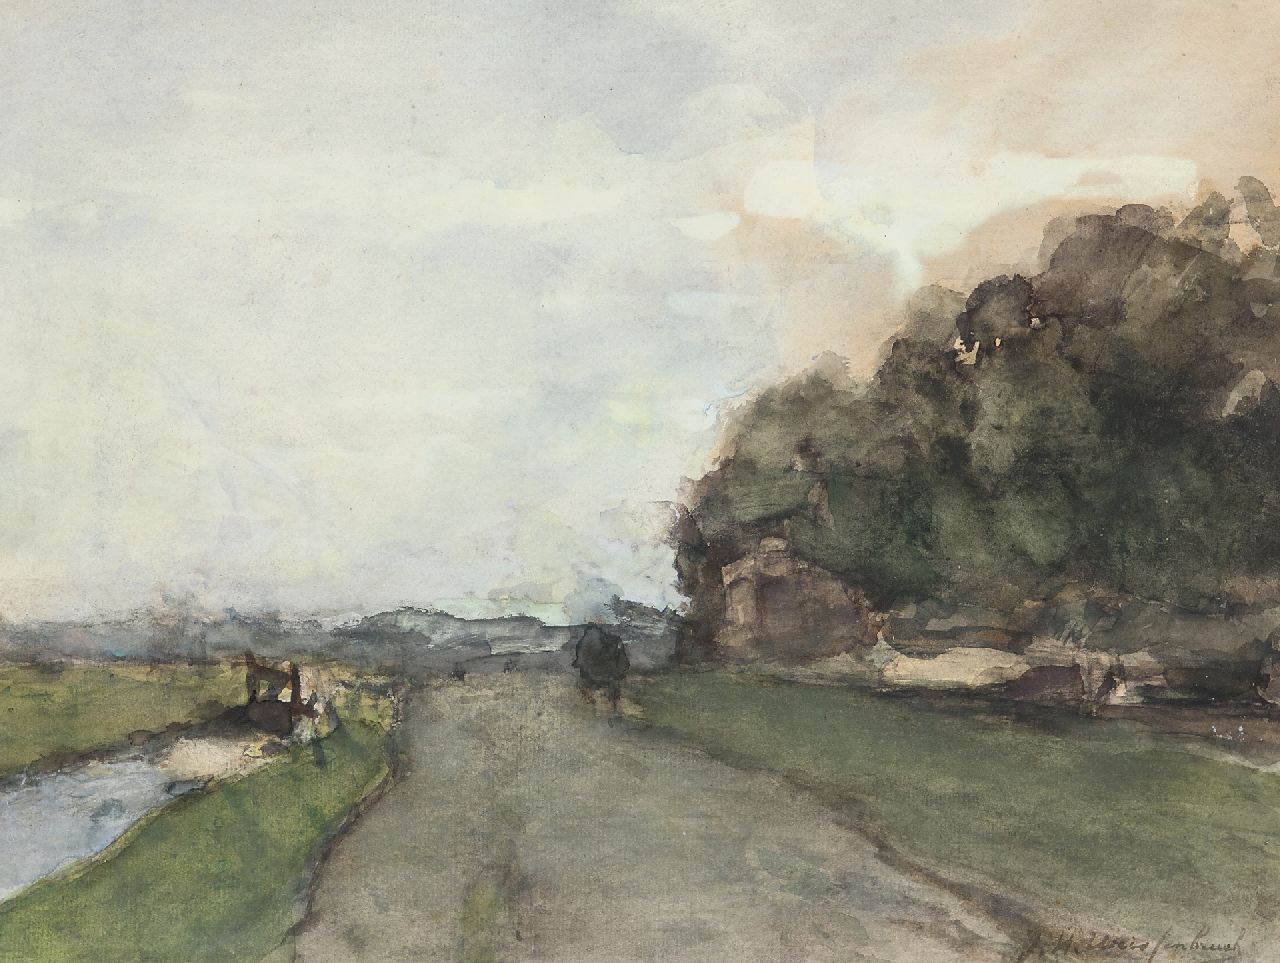 Weissenbruch H.J.  | Hendrik Johannes 'J.H.' Weissenbruch | Watercolours and drawings offered for sale | Landscape near 'Cromvliet' along the 'Vliet', Rijswijk; on the reverse: Sailing ship at sea, watercolour on paper 31.9 x 43.0 cm, signed l.r.